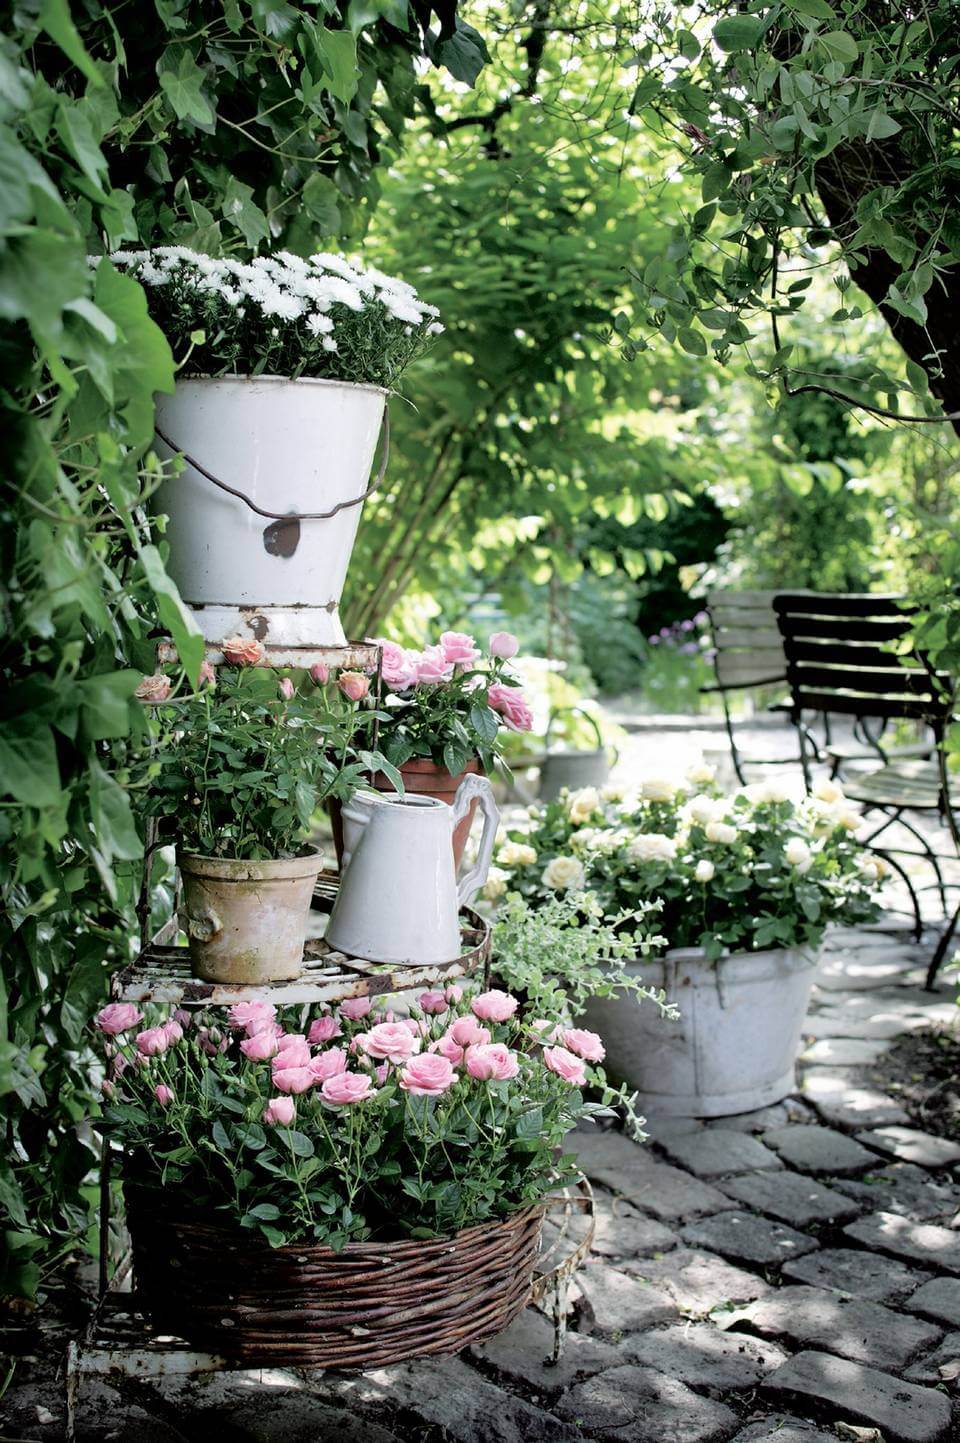 Tiered Potted Roses in Planters